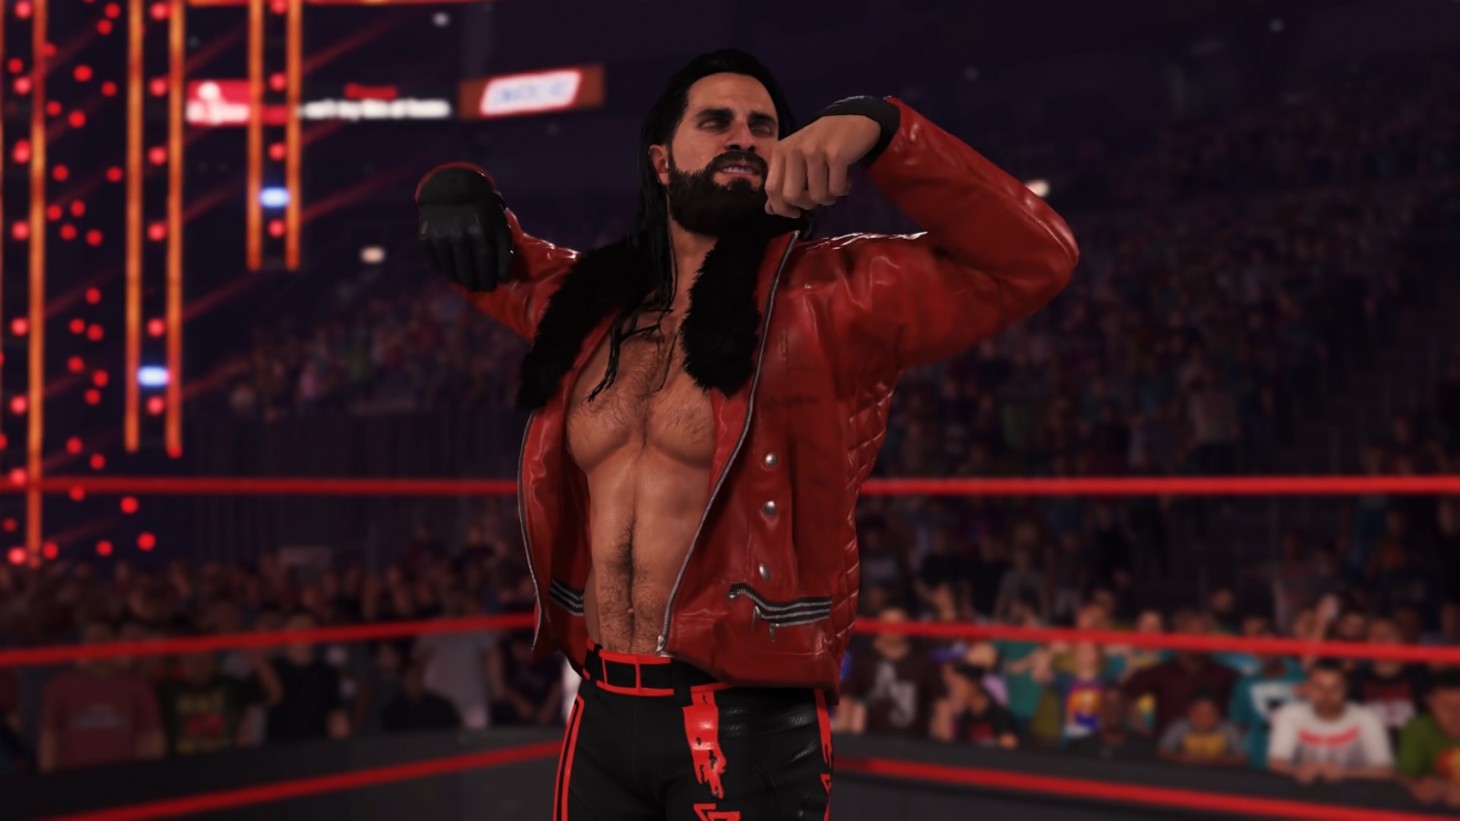 WWE 2K22: The Full Roster At Launch - Game Informer